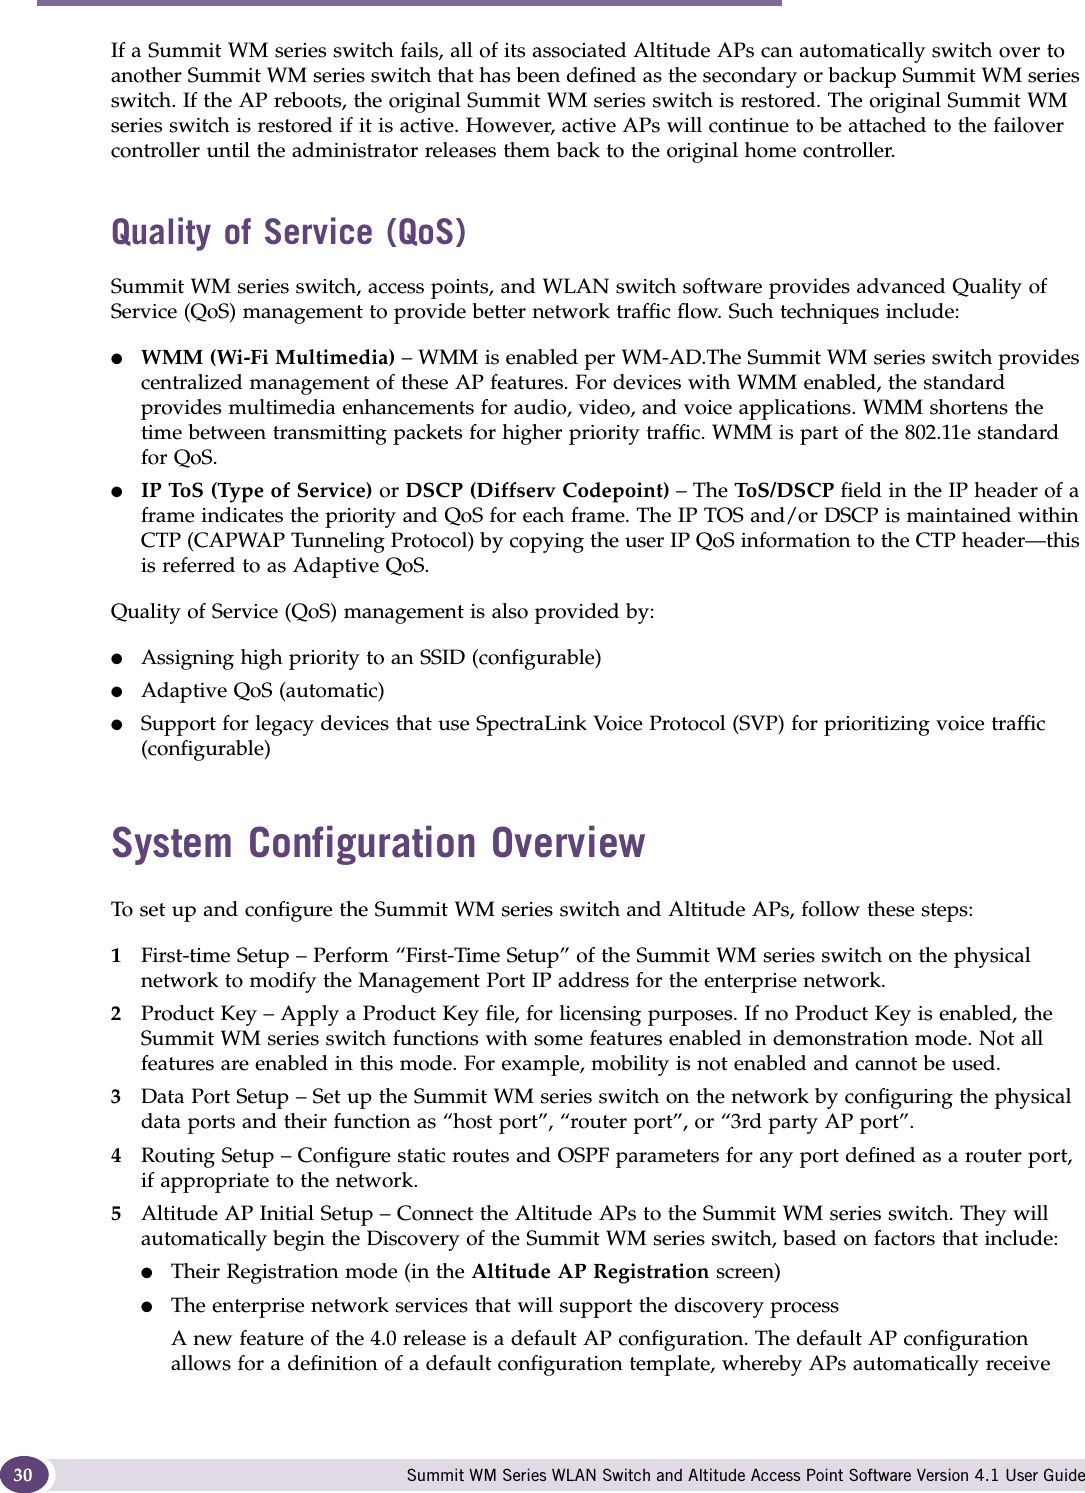 Overview of the Summit WM series switch, access points, and WLAN switch software solution Summit WM Series WLAN Switch and Altitude Access Point Software Version 4.1 User Guide30If a Summit WM series switch fails, all of its associated Altitude APs can automatically switch over to another Summit WM series switch that has been defined as the secondary or backup Summit WM series switch. If the AP reboots, the original Summit WM series switch is restored. The original Summit WM series switch is restored if it is active. However, active APs will continue to be attached to the failover controller until the administrator releases them back to the original home controller. Quality of Service (QoS)Summit WM series switch, access points, and WLAN switch software provides advanced Quality of Service (QoS) management to provide better network traffic flow. Such techniques include:●WMM (Wi-Fi Multimedia) – WMM is enabled per WM-AD.The Summit WM series switch provides centralized management of these AP features. For devices with WMM enabled, the standard provides multimedia enhancements for audio, video, and voice applications. WMM shortens the time between transmitting packets for higher priority traffic. WMM is part of the 802.11e standard for QoS.●IP ToS (Type of Service) or DSCP (Diffserv Codepoint) – The ToS/ D SC P  field in the IP header of a frame indicates the priority and QoS for each frame. The IP TOS and/or DSCP is maintained within CTP (CAPWAP Tunneling Protocol) by copying the user IP QoS information to the CTP header—this is referred to as Adaptive QoS. Quality of Service (QoS) management is also provided by:●Assigning high priority to an SSID (configurable)●Adaptive QoS (automatic)●Support for legacy devices that use SpectraLink Voice Protocol (SVP) for prioritizing voice traffic (configurable)System Configuration OverviewTo set up and configure the Summit WM series switch and Altitude APs, follow these steps:1First-time Setup – Perform “First-Time Setup” of the Summit WM series switch on the physical network to modify the Management Port IP address for the enterprise network.2Product Key – Apply a Product Key file, for licensing purposes. If no Product Key is enabled, the Summit WM series switch functions with some features enabled in demonstration mode. Not all features are enabled in this mode. For example, mobility is not enabled and cannot be used.3Data Port Setup – Set up the Summit WM series switch on the network by configuring the physical data ports and their function as “host port”, “router port”, or “3rd party AP port”.4Routing Setup – Configure static routes and OSPF parameters for any port defined as a router port, if appropriate to the network.5Altitude AP Initial Setup – Connect the Altitude APs to the Summit WM series switch. They will automatically begin the Discovery of the Summit WM series switch, based on factors that include:●Their Registration mode (in the Altitude AP Registration screen)●The enterprise network services that will support the discovery process A new feature of the 4.0 release is a default AP configuration. The default AP configuration allows for a definition of a default configuration template, whereby APs automatically receive 